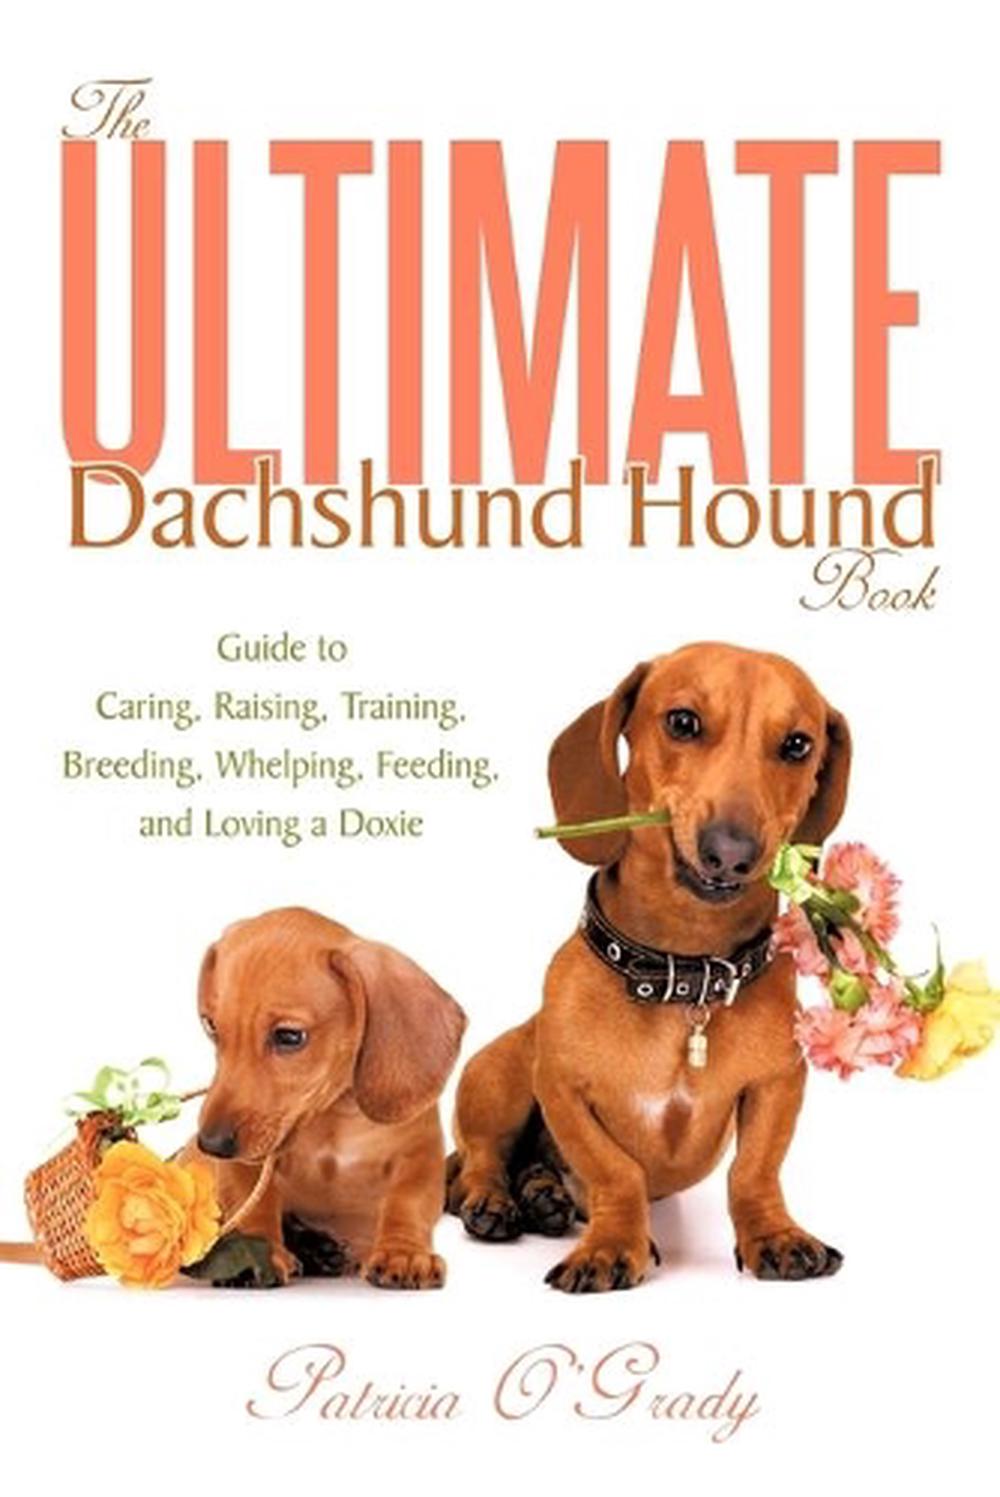 The Ultimate Dachshund Hound Book Guide to Caring